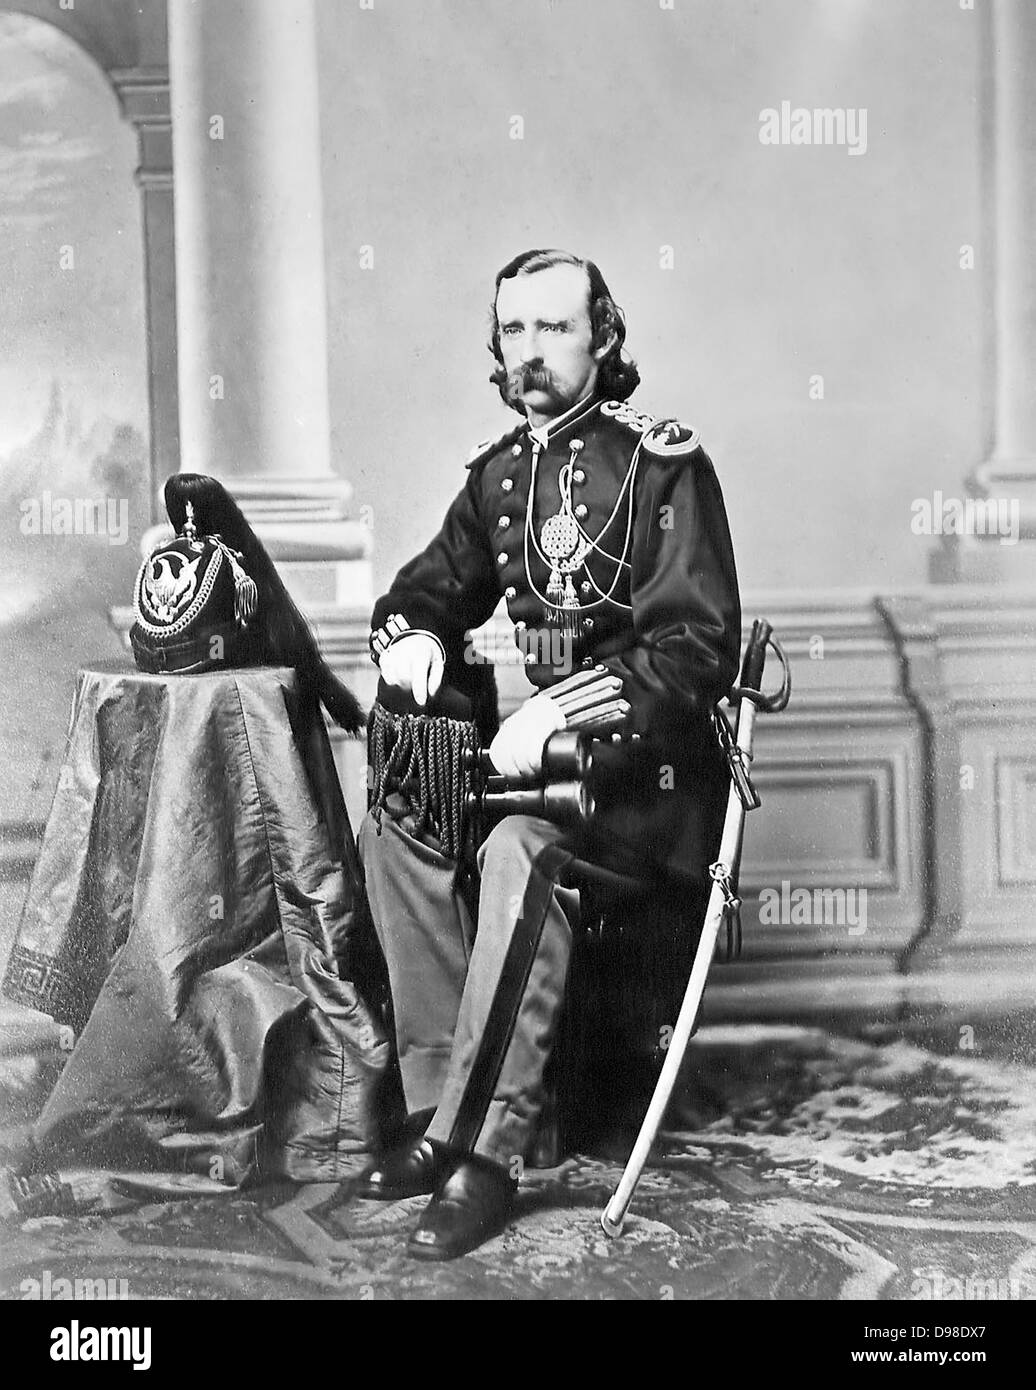 George Armstrong Custer (1839-1876) United States Army office and cavalry commander in American Civil War and Indian Wars. Defeated and killed at Battle of Little Bighorn in what iscalled Custer's Last Stand. Photograph. Stock Photo